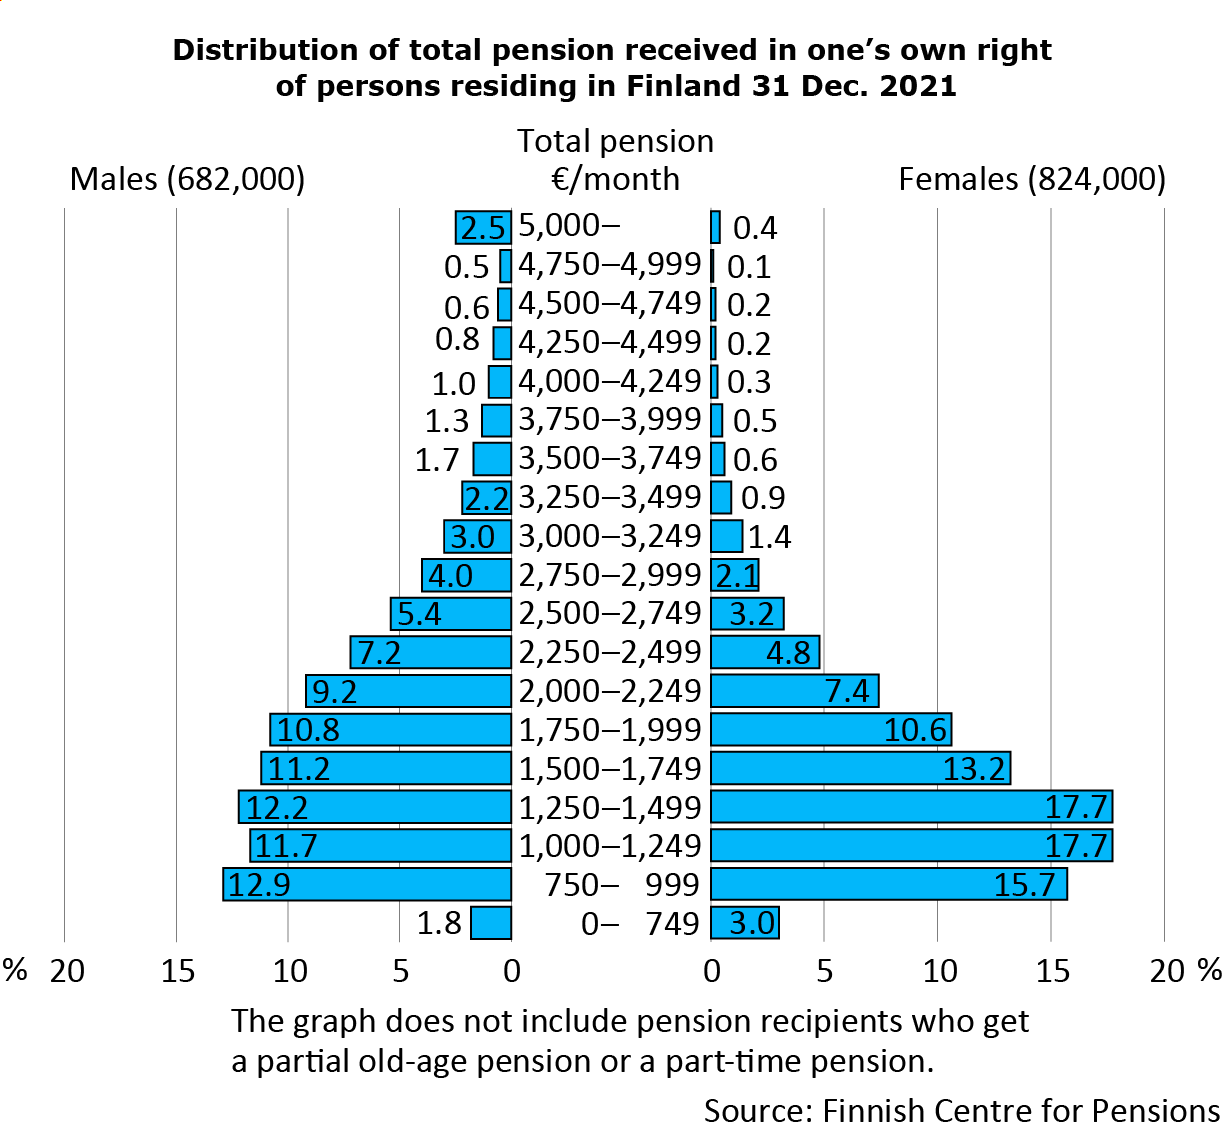 Distribution of total pension received in one’s own right of persons residing in Finland 31 Dec. 2021, by gender. The bar chart shows that women’s total pension is lower than men’s. For around one third of women, the total monthly pension is between €1,000 and €1,499. For slightly less than 20%, the pension is lower than that, and for an ample 20% of the women, the total pension is at least €2,000 per month. Correspondingly, for around one quarter of the men, the total monthly pension is between €1,000 and €1,499. For 15%, it is lower than that. For 40% of the men, the total monthly pension is at least €2,000. Source: Finnish Centre for Pensions.